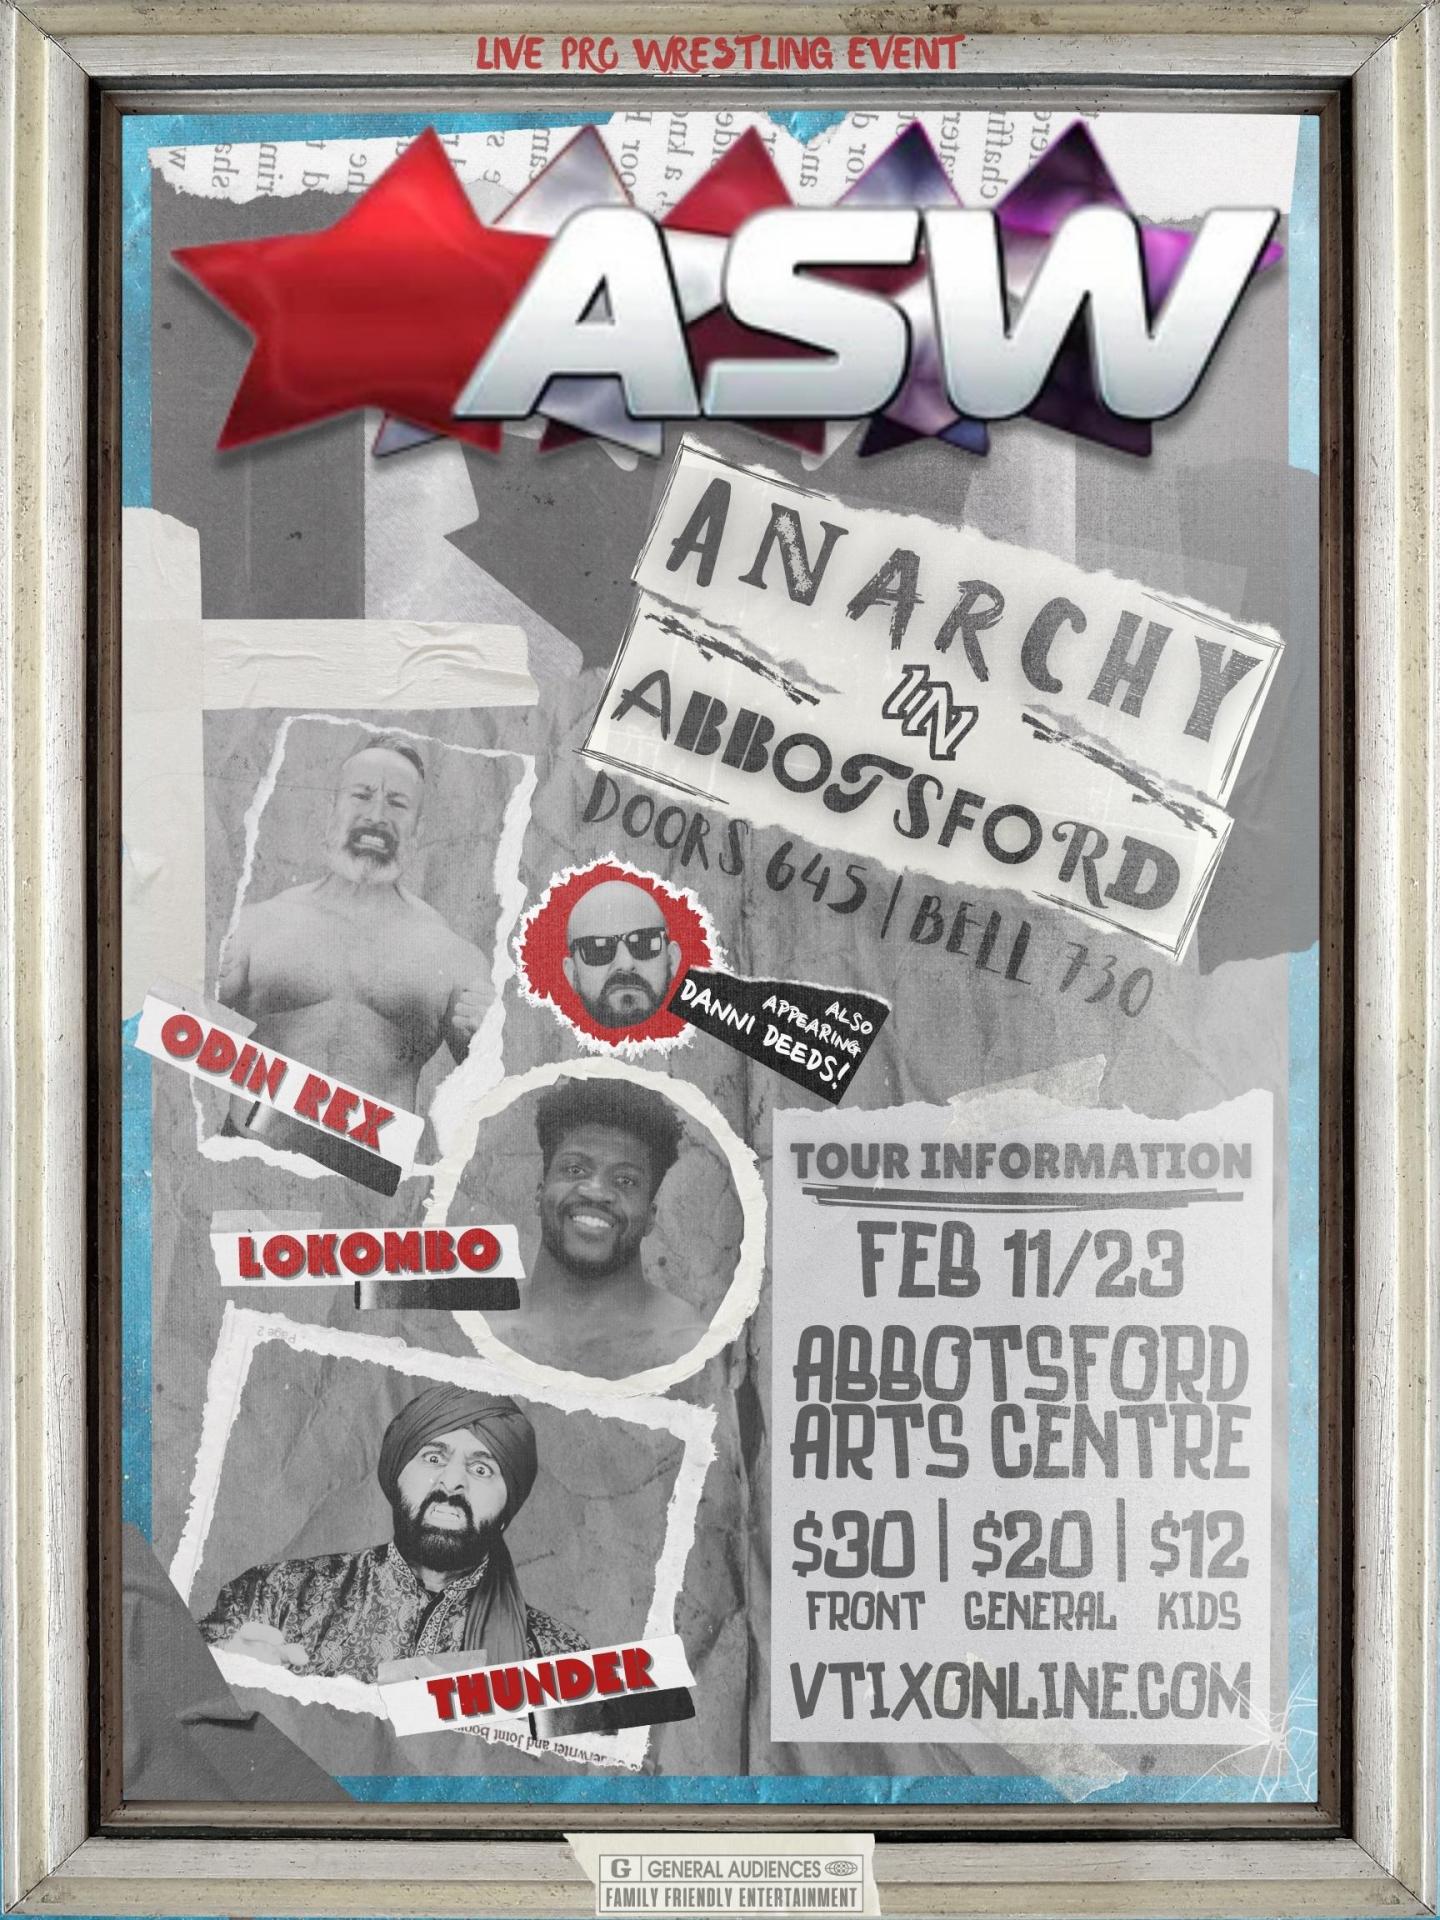 ASW Wrestling presents: ANARCHY in ABBOTSFORD